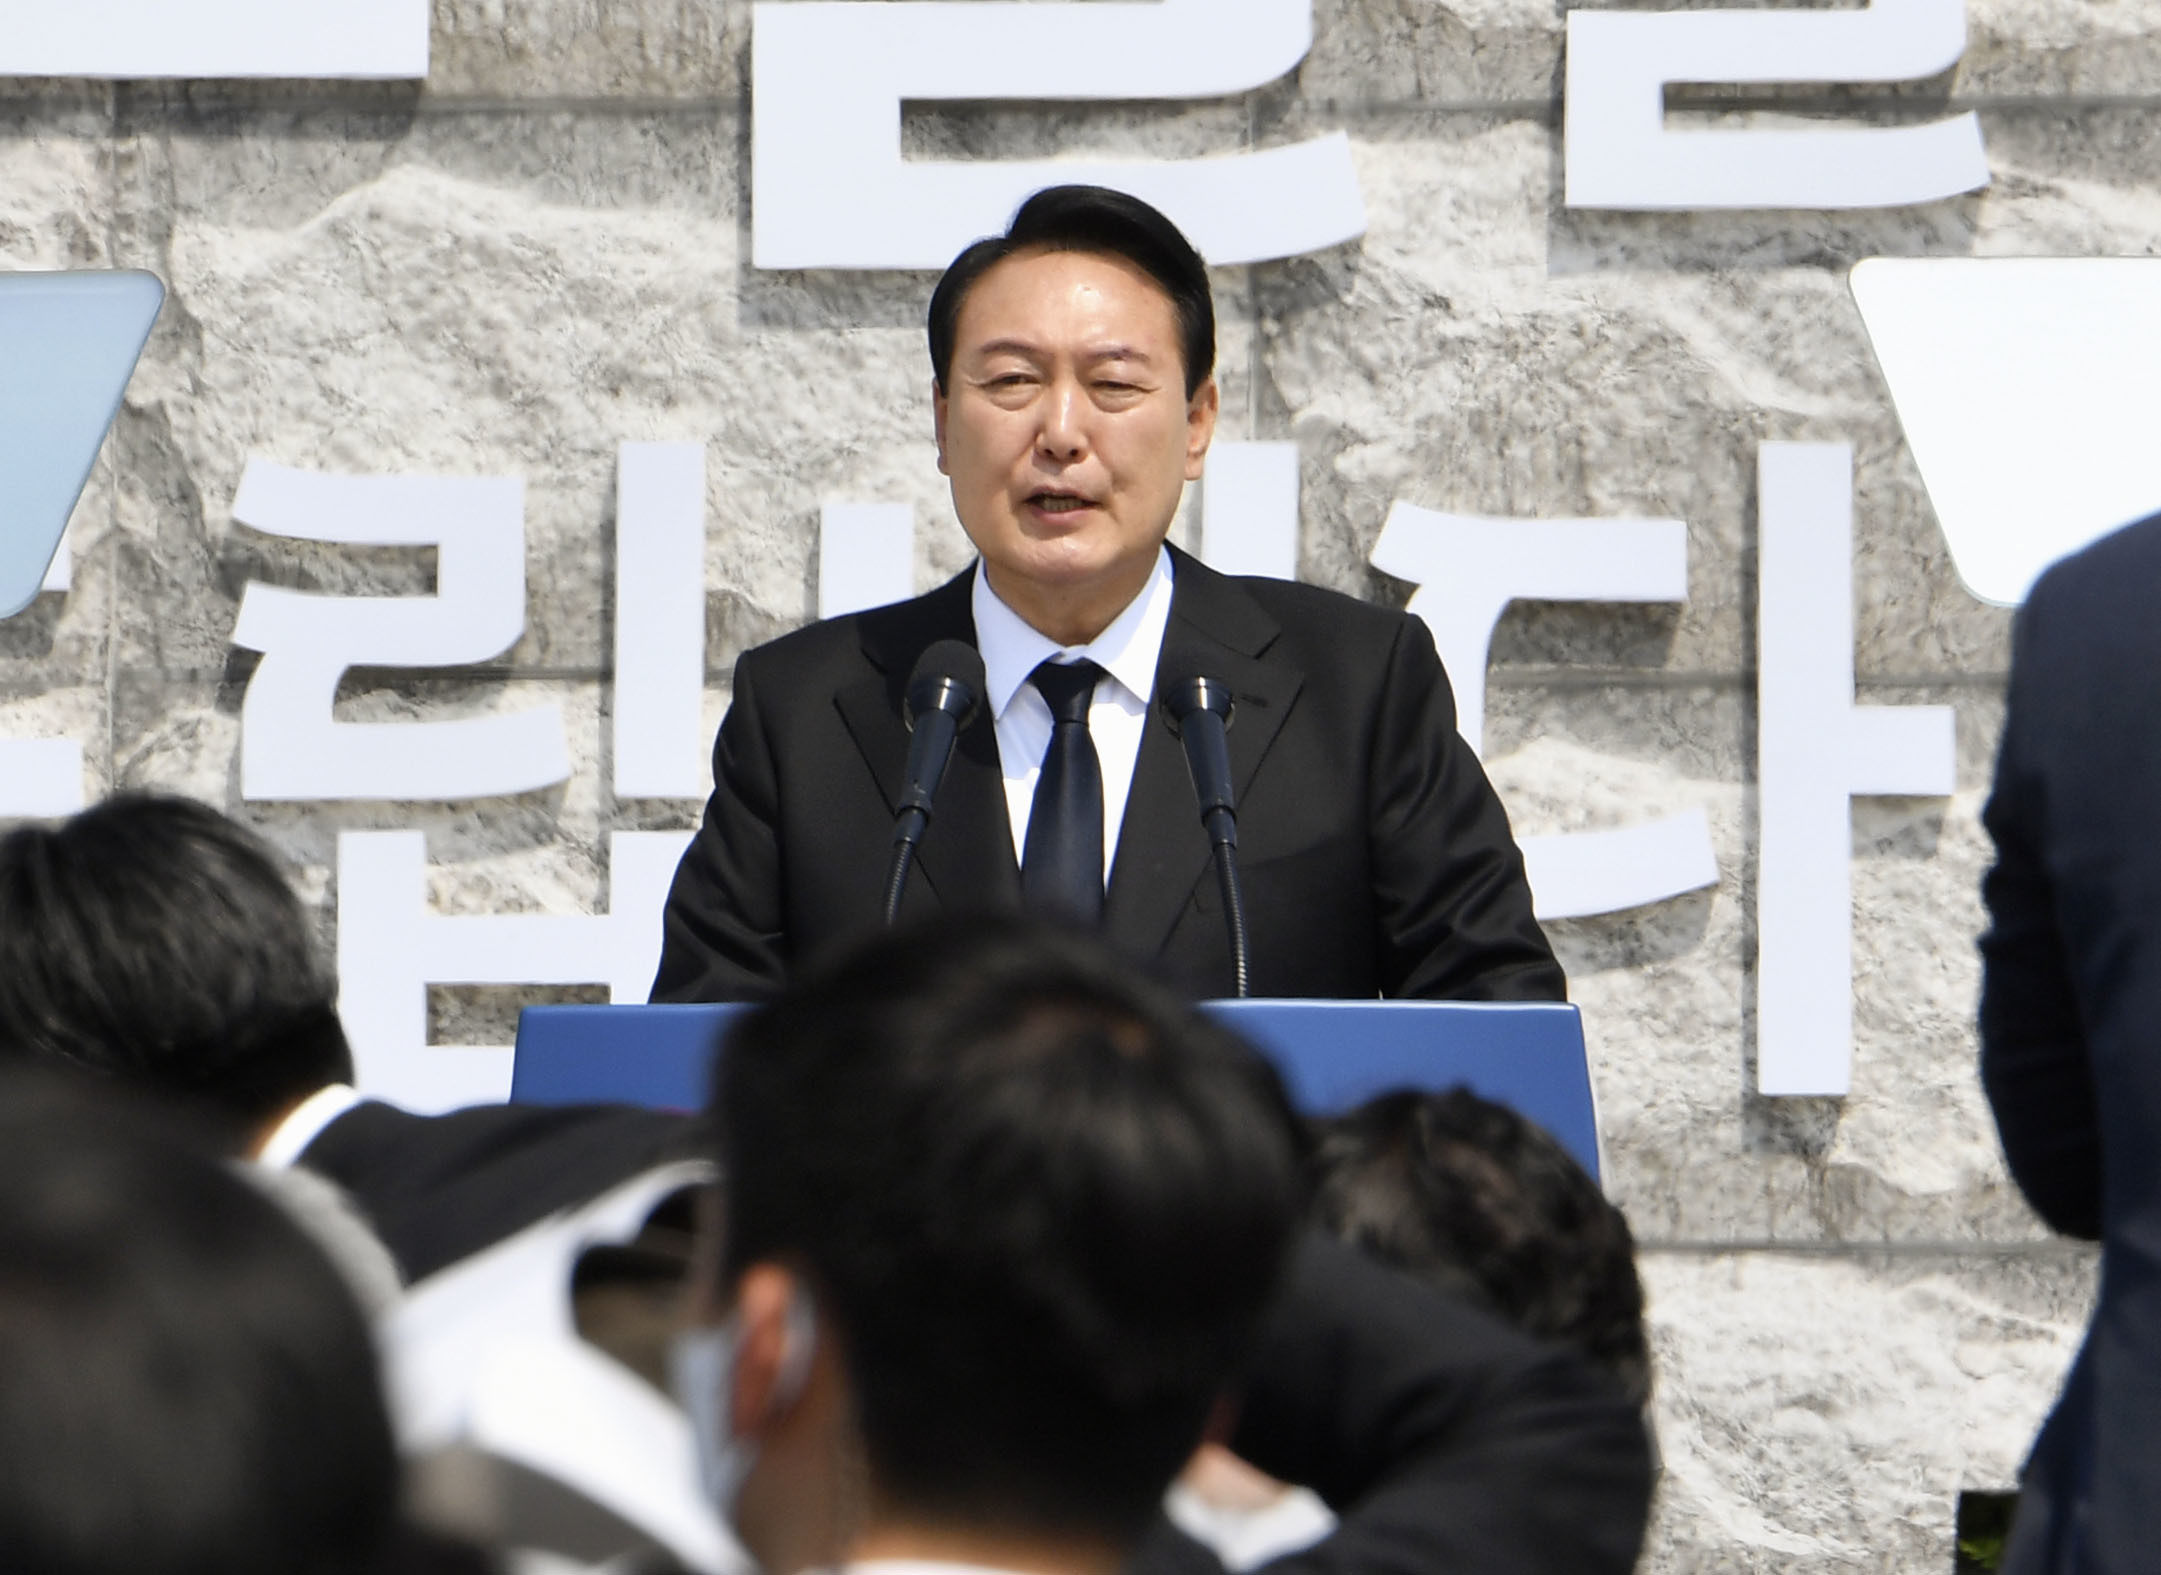 The election of Yoon Suk-yeo as South Korea’s president has raised questions over the future direction of relations between Seoul and Beijing. Photo: Kyodo